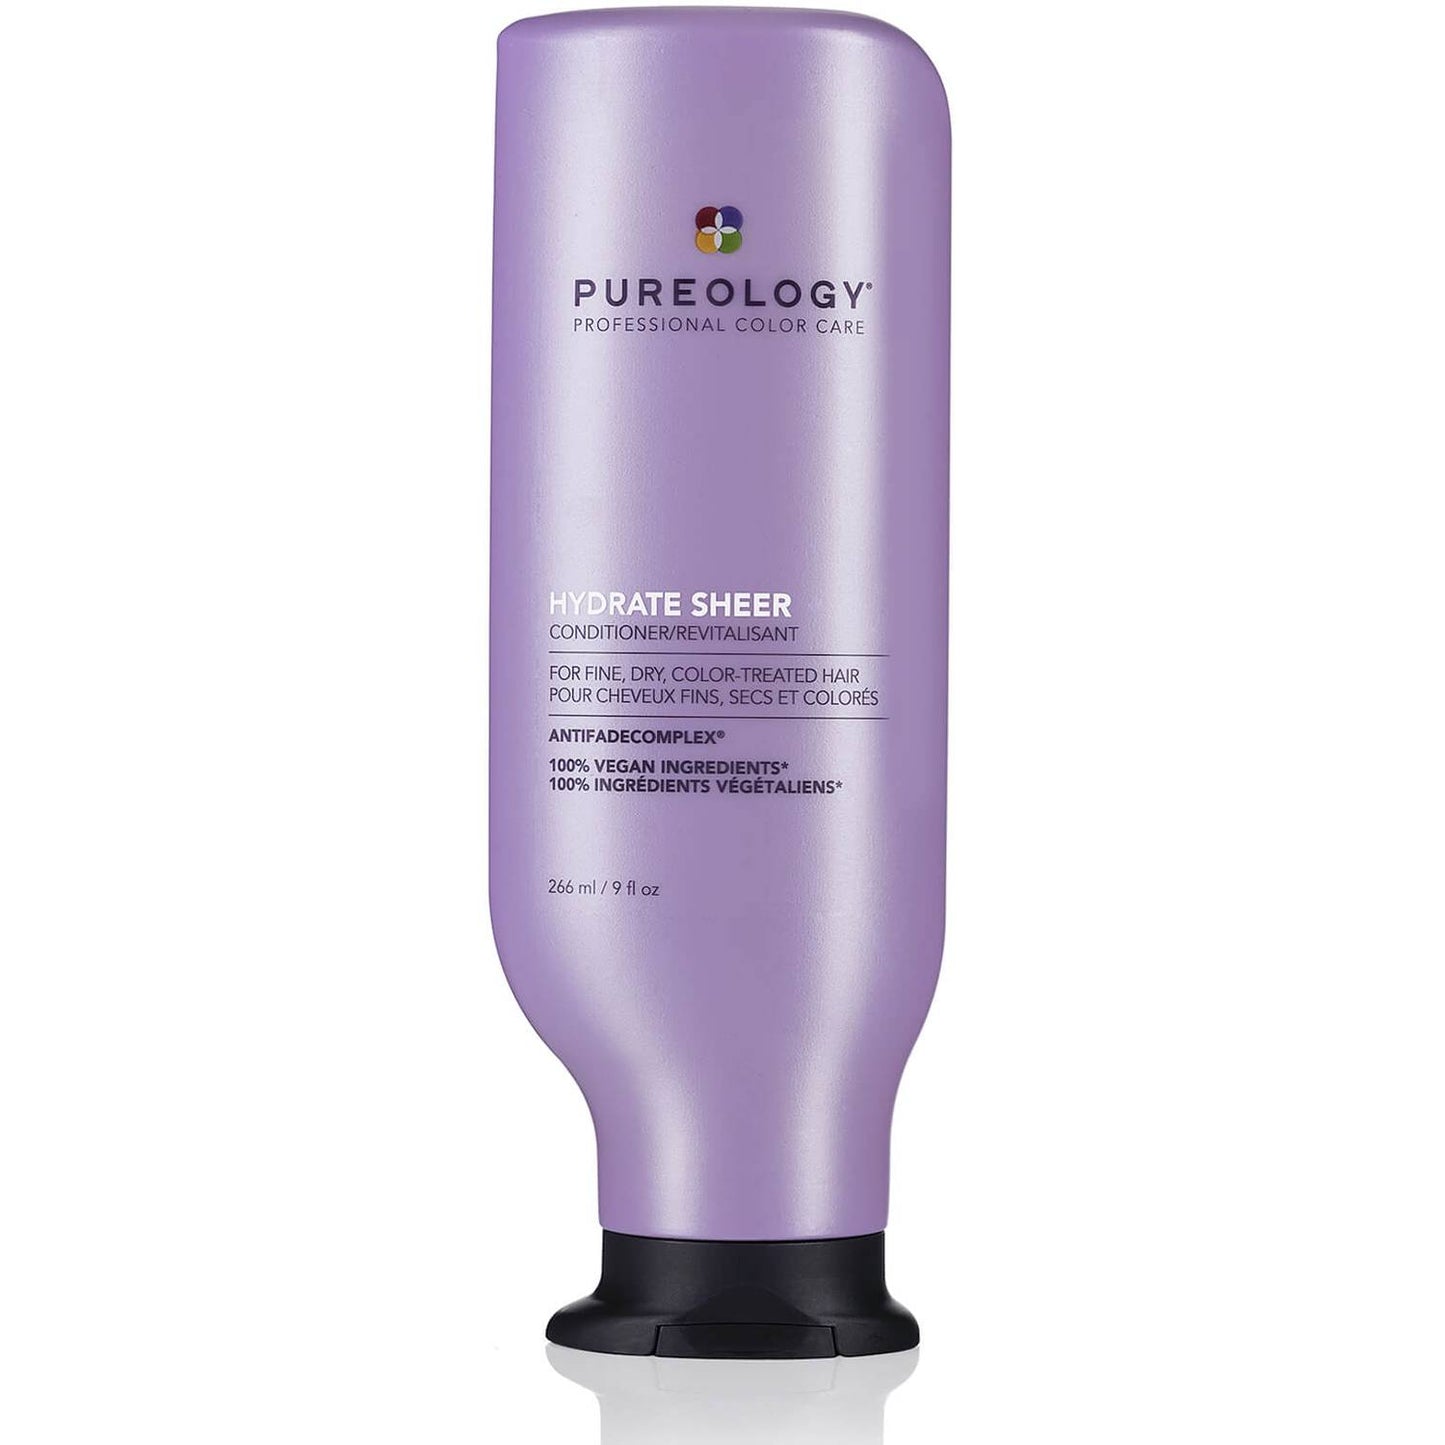 Pureology Hydrate Sheer Conditioner 266ml - shelley and co